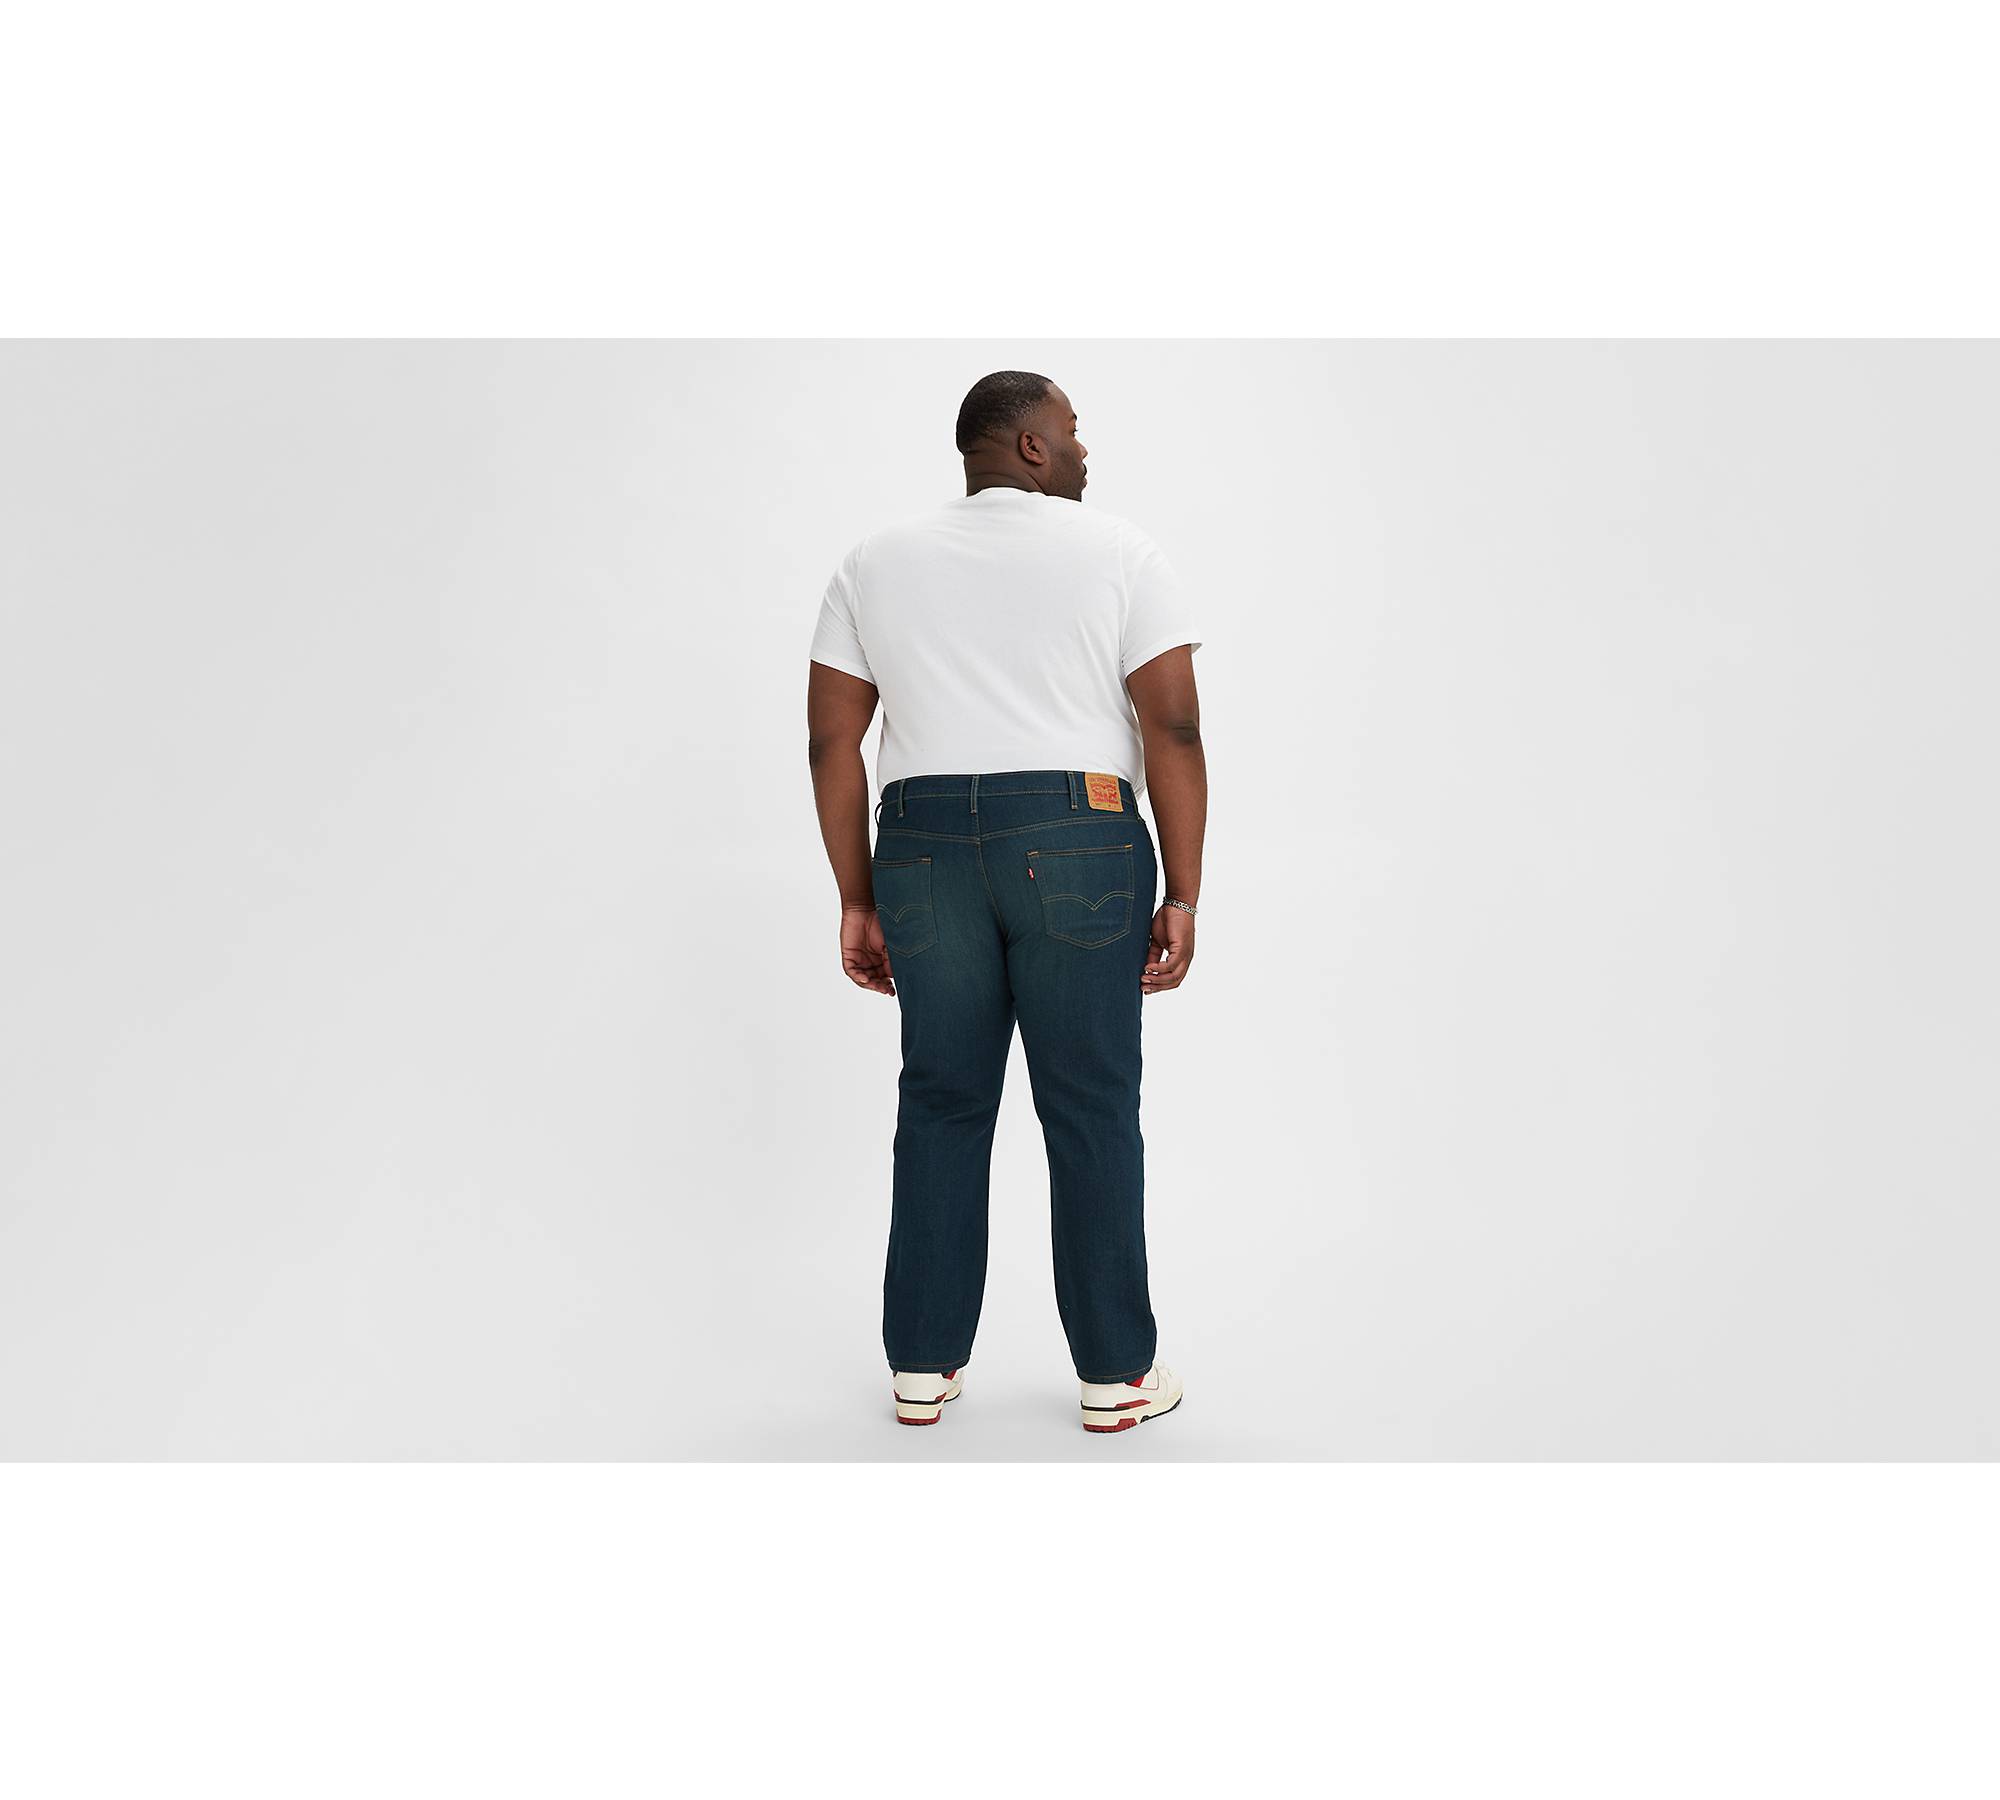 Signature by Levi Strauss & Co. Men's and Big and Tall Slim Fit